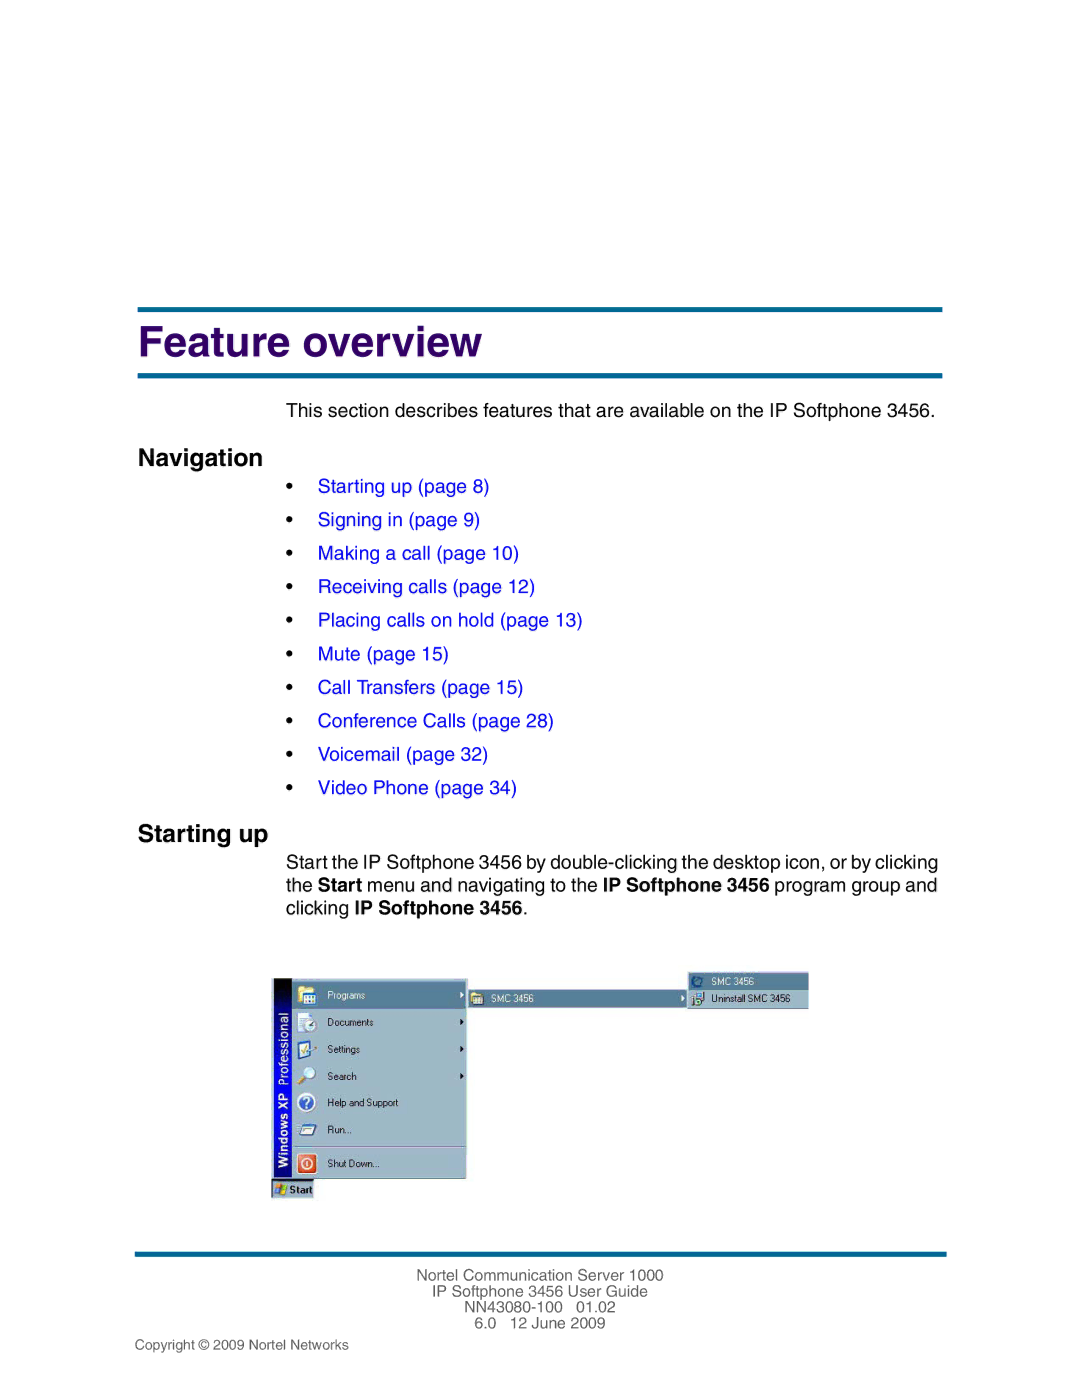 Nortel Networks NN43080-100, 3456 manual Feature overview, Starting up 